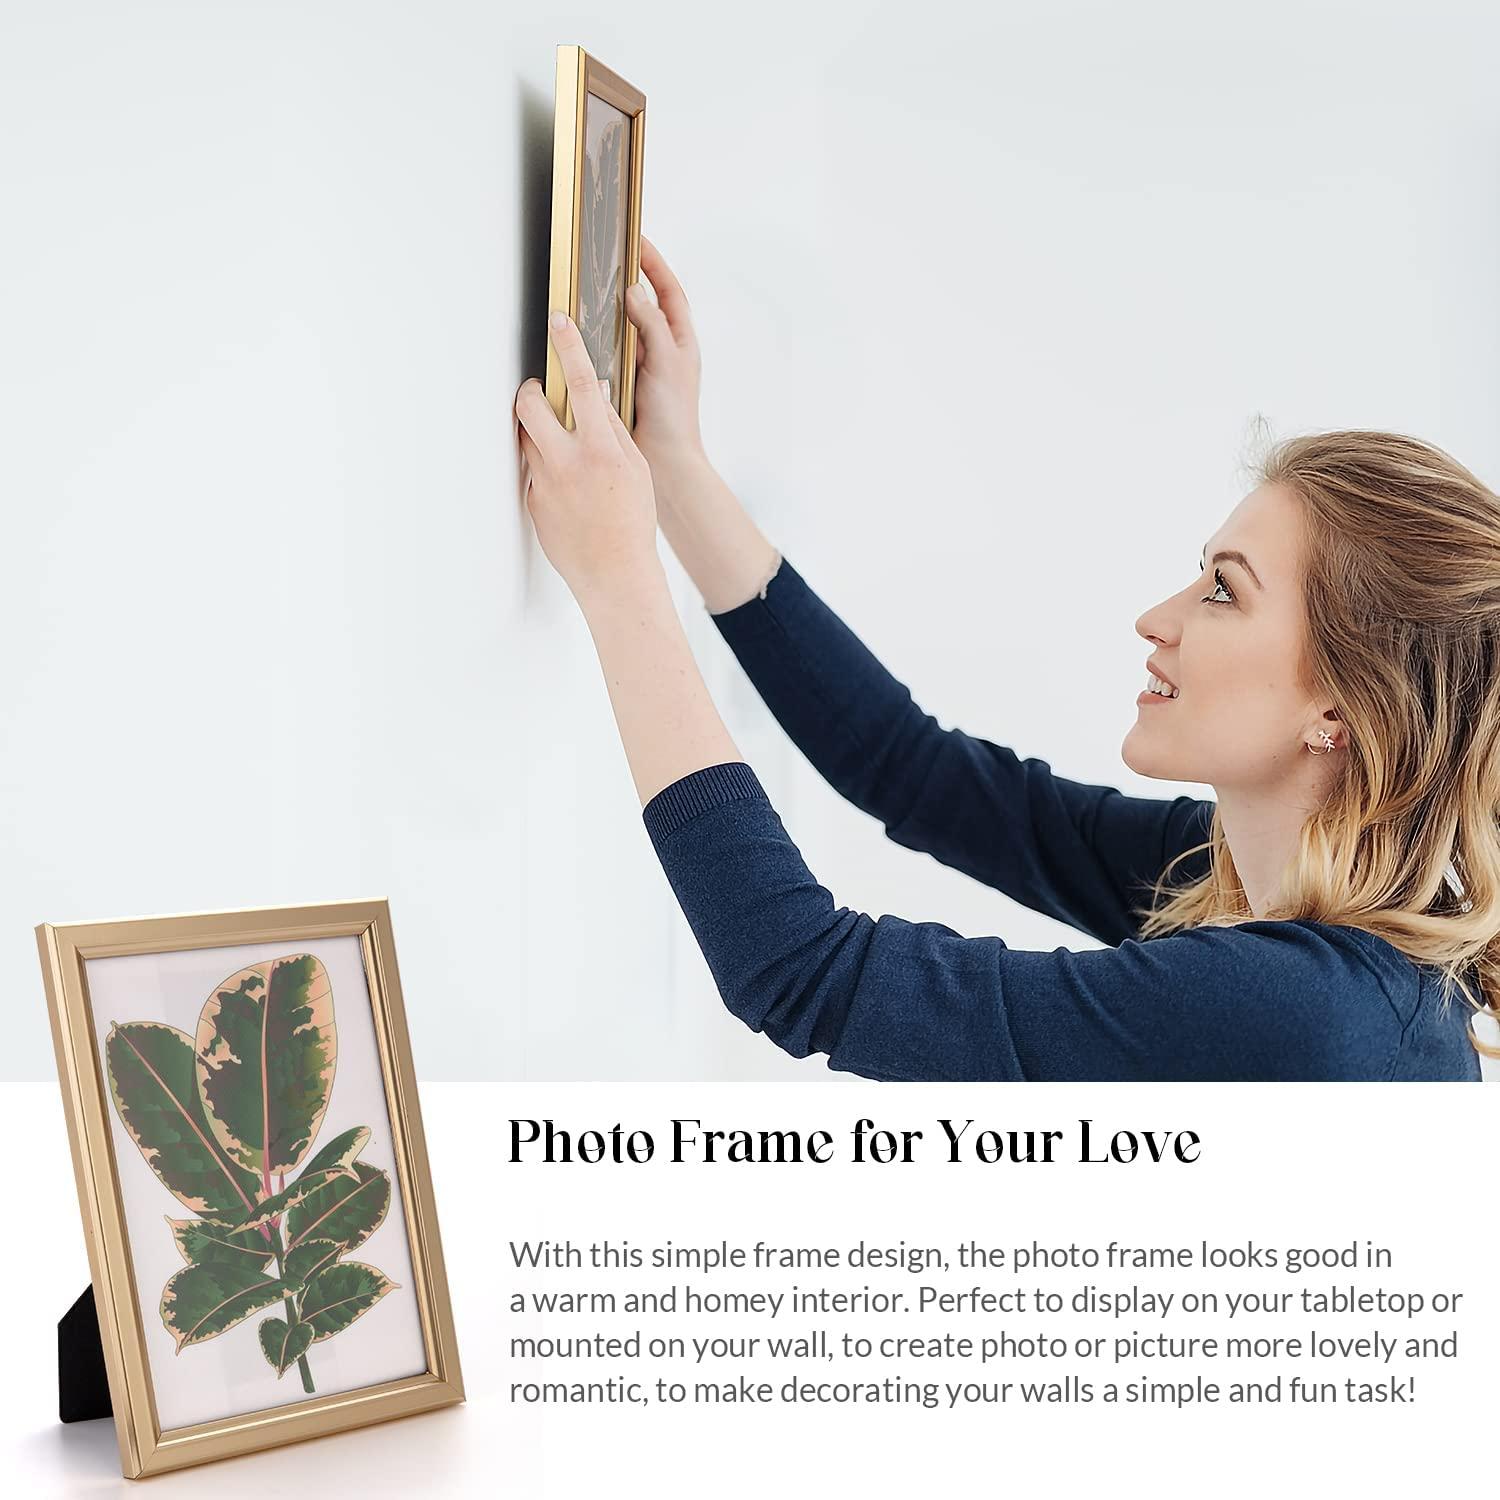 Best Ready-Made Photo Frames for Displaying Your Favorite Images